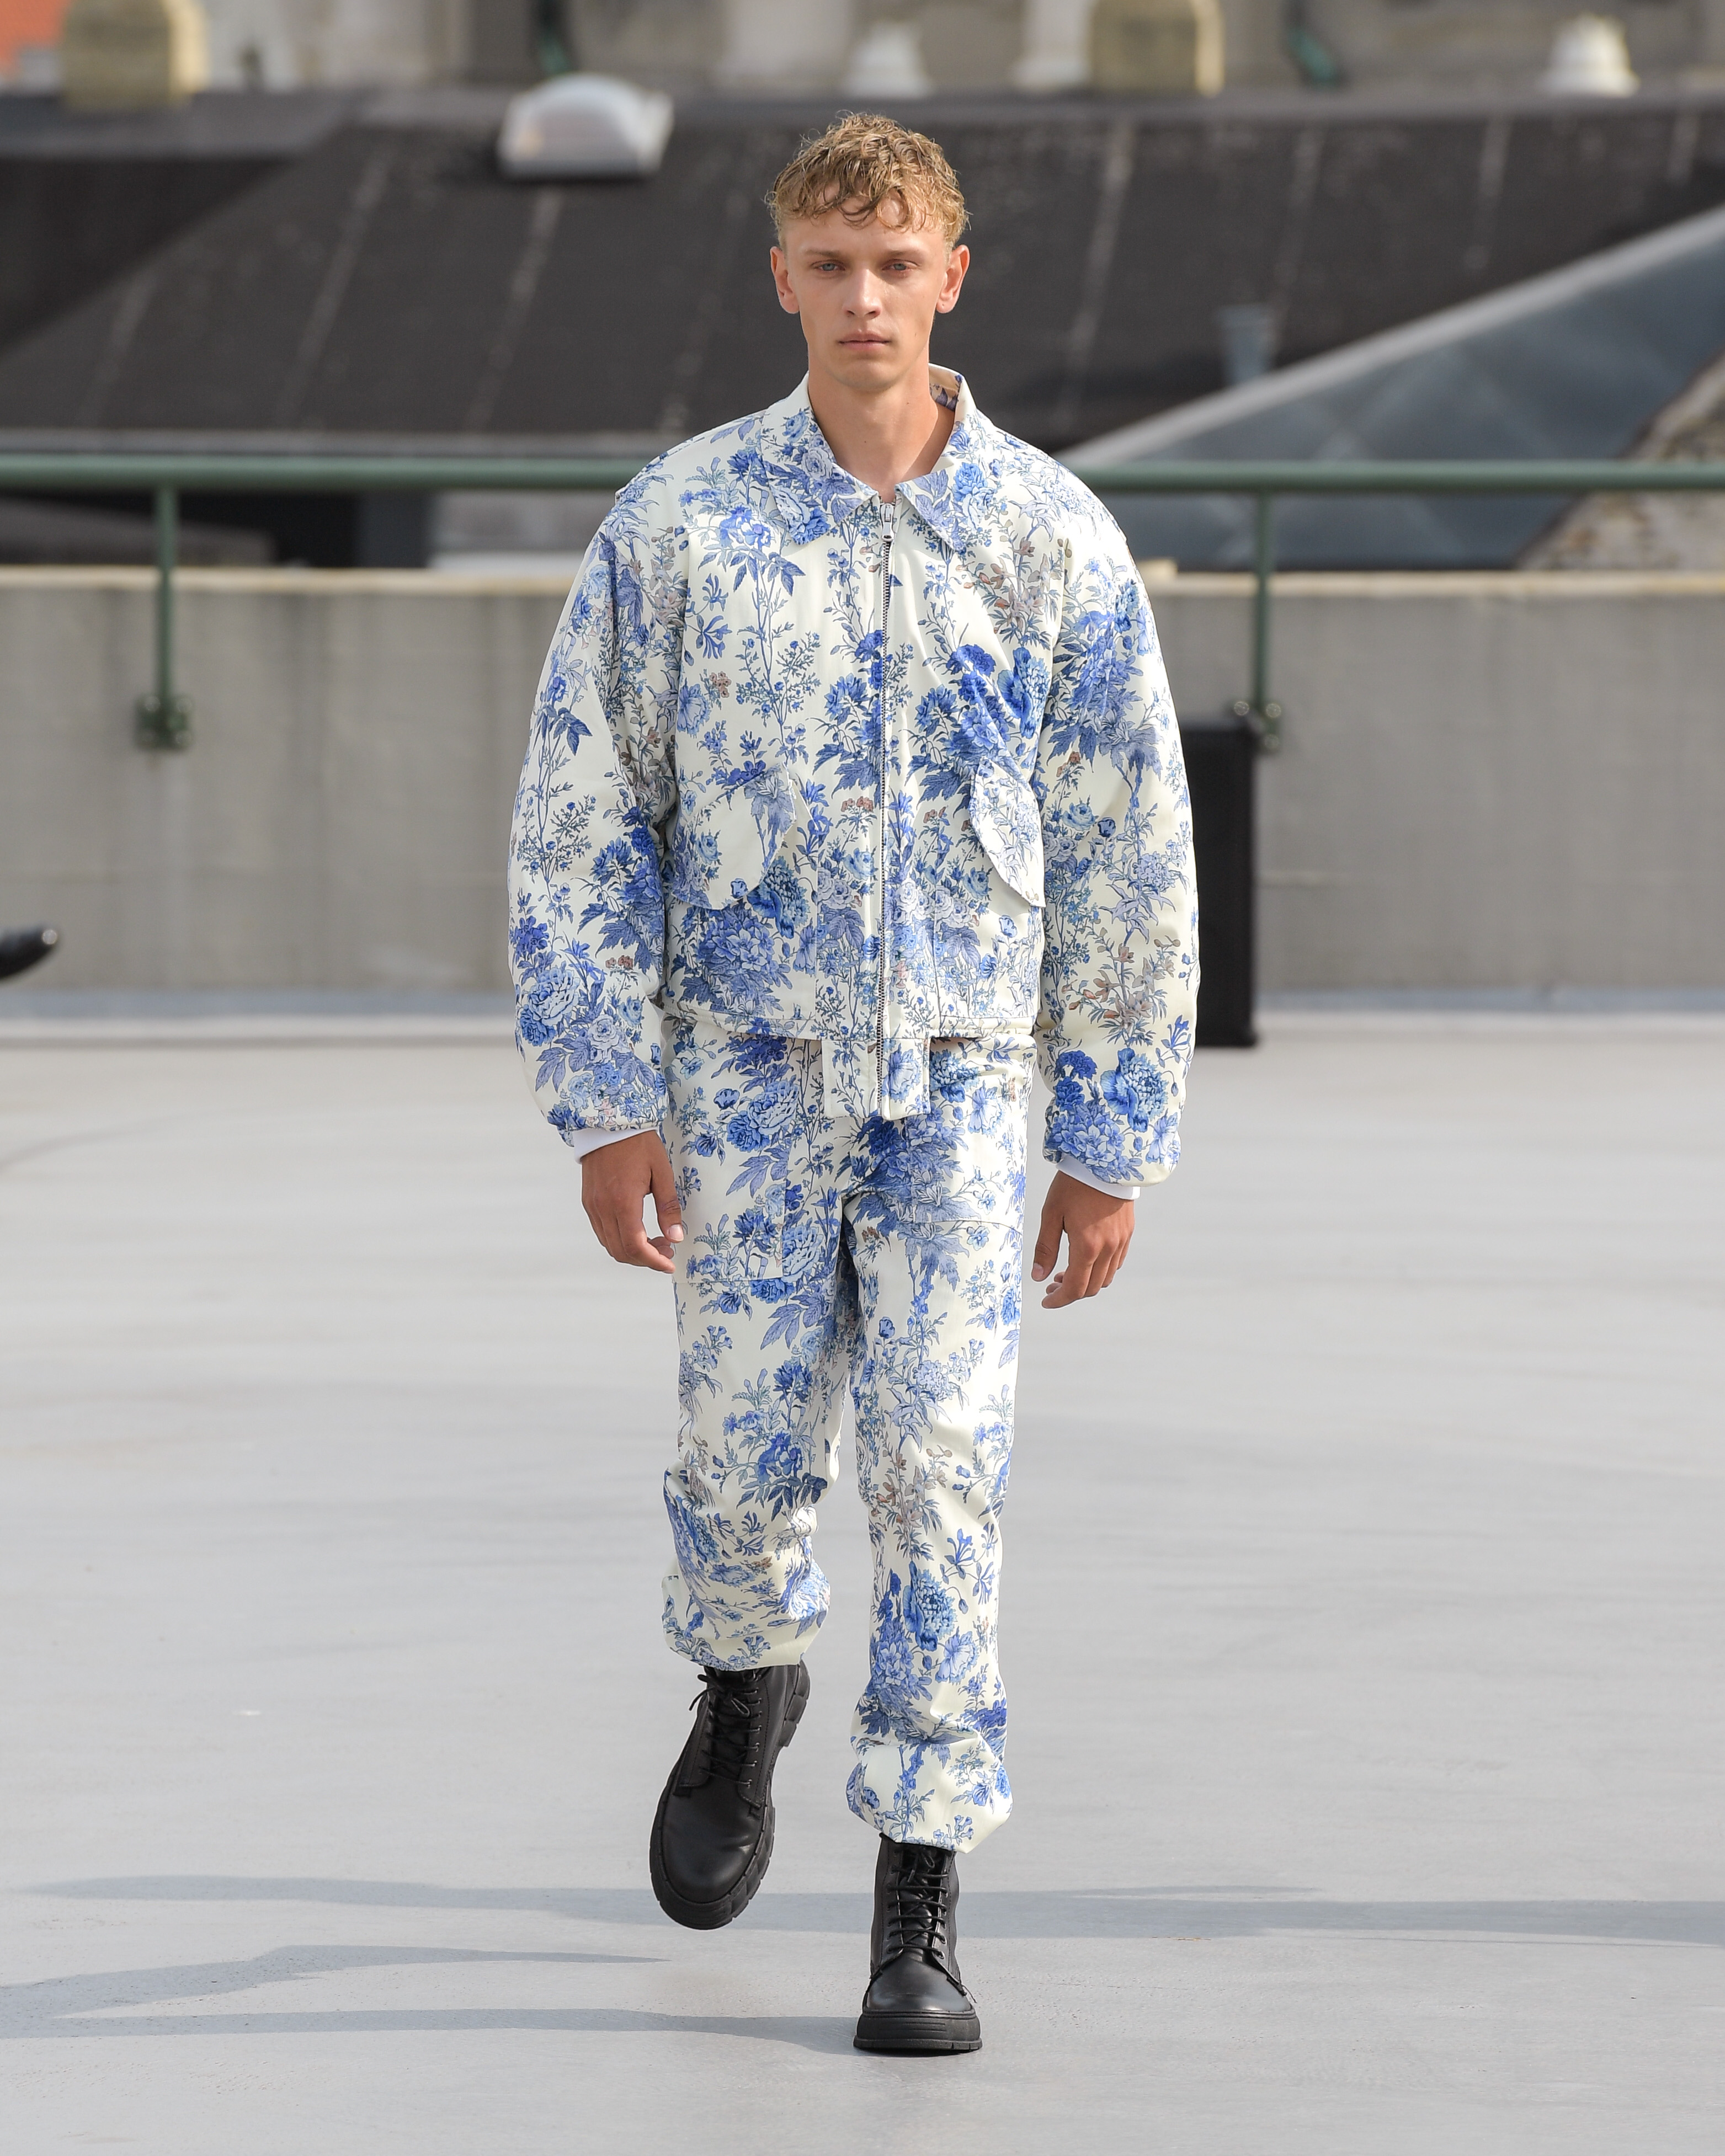 The collections at Copenhagen Fashion Week SS22